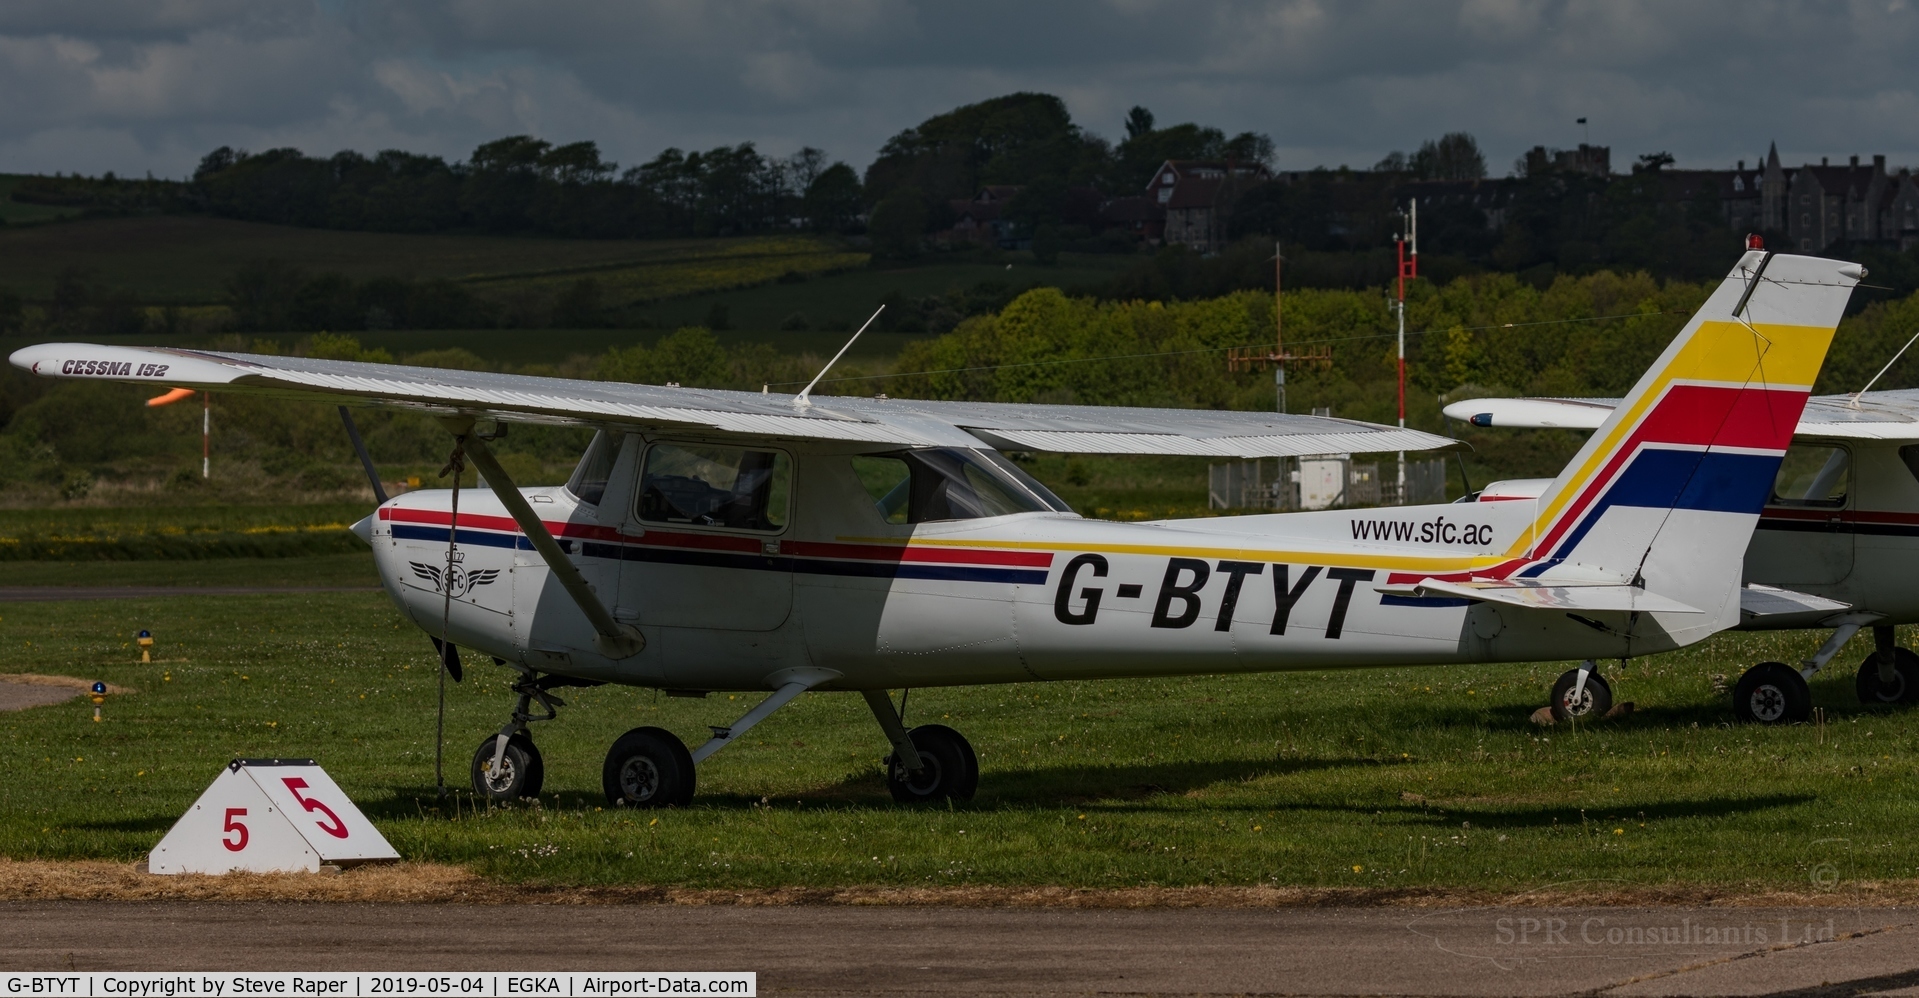 G-BTYT, 1978 Cessna 152 C/N 152-80455, Parked up at Shoreham Airport